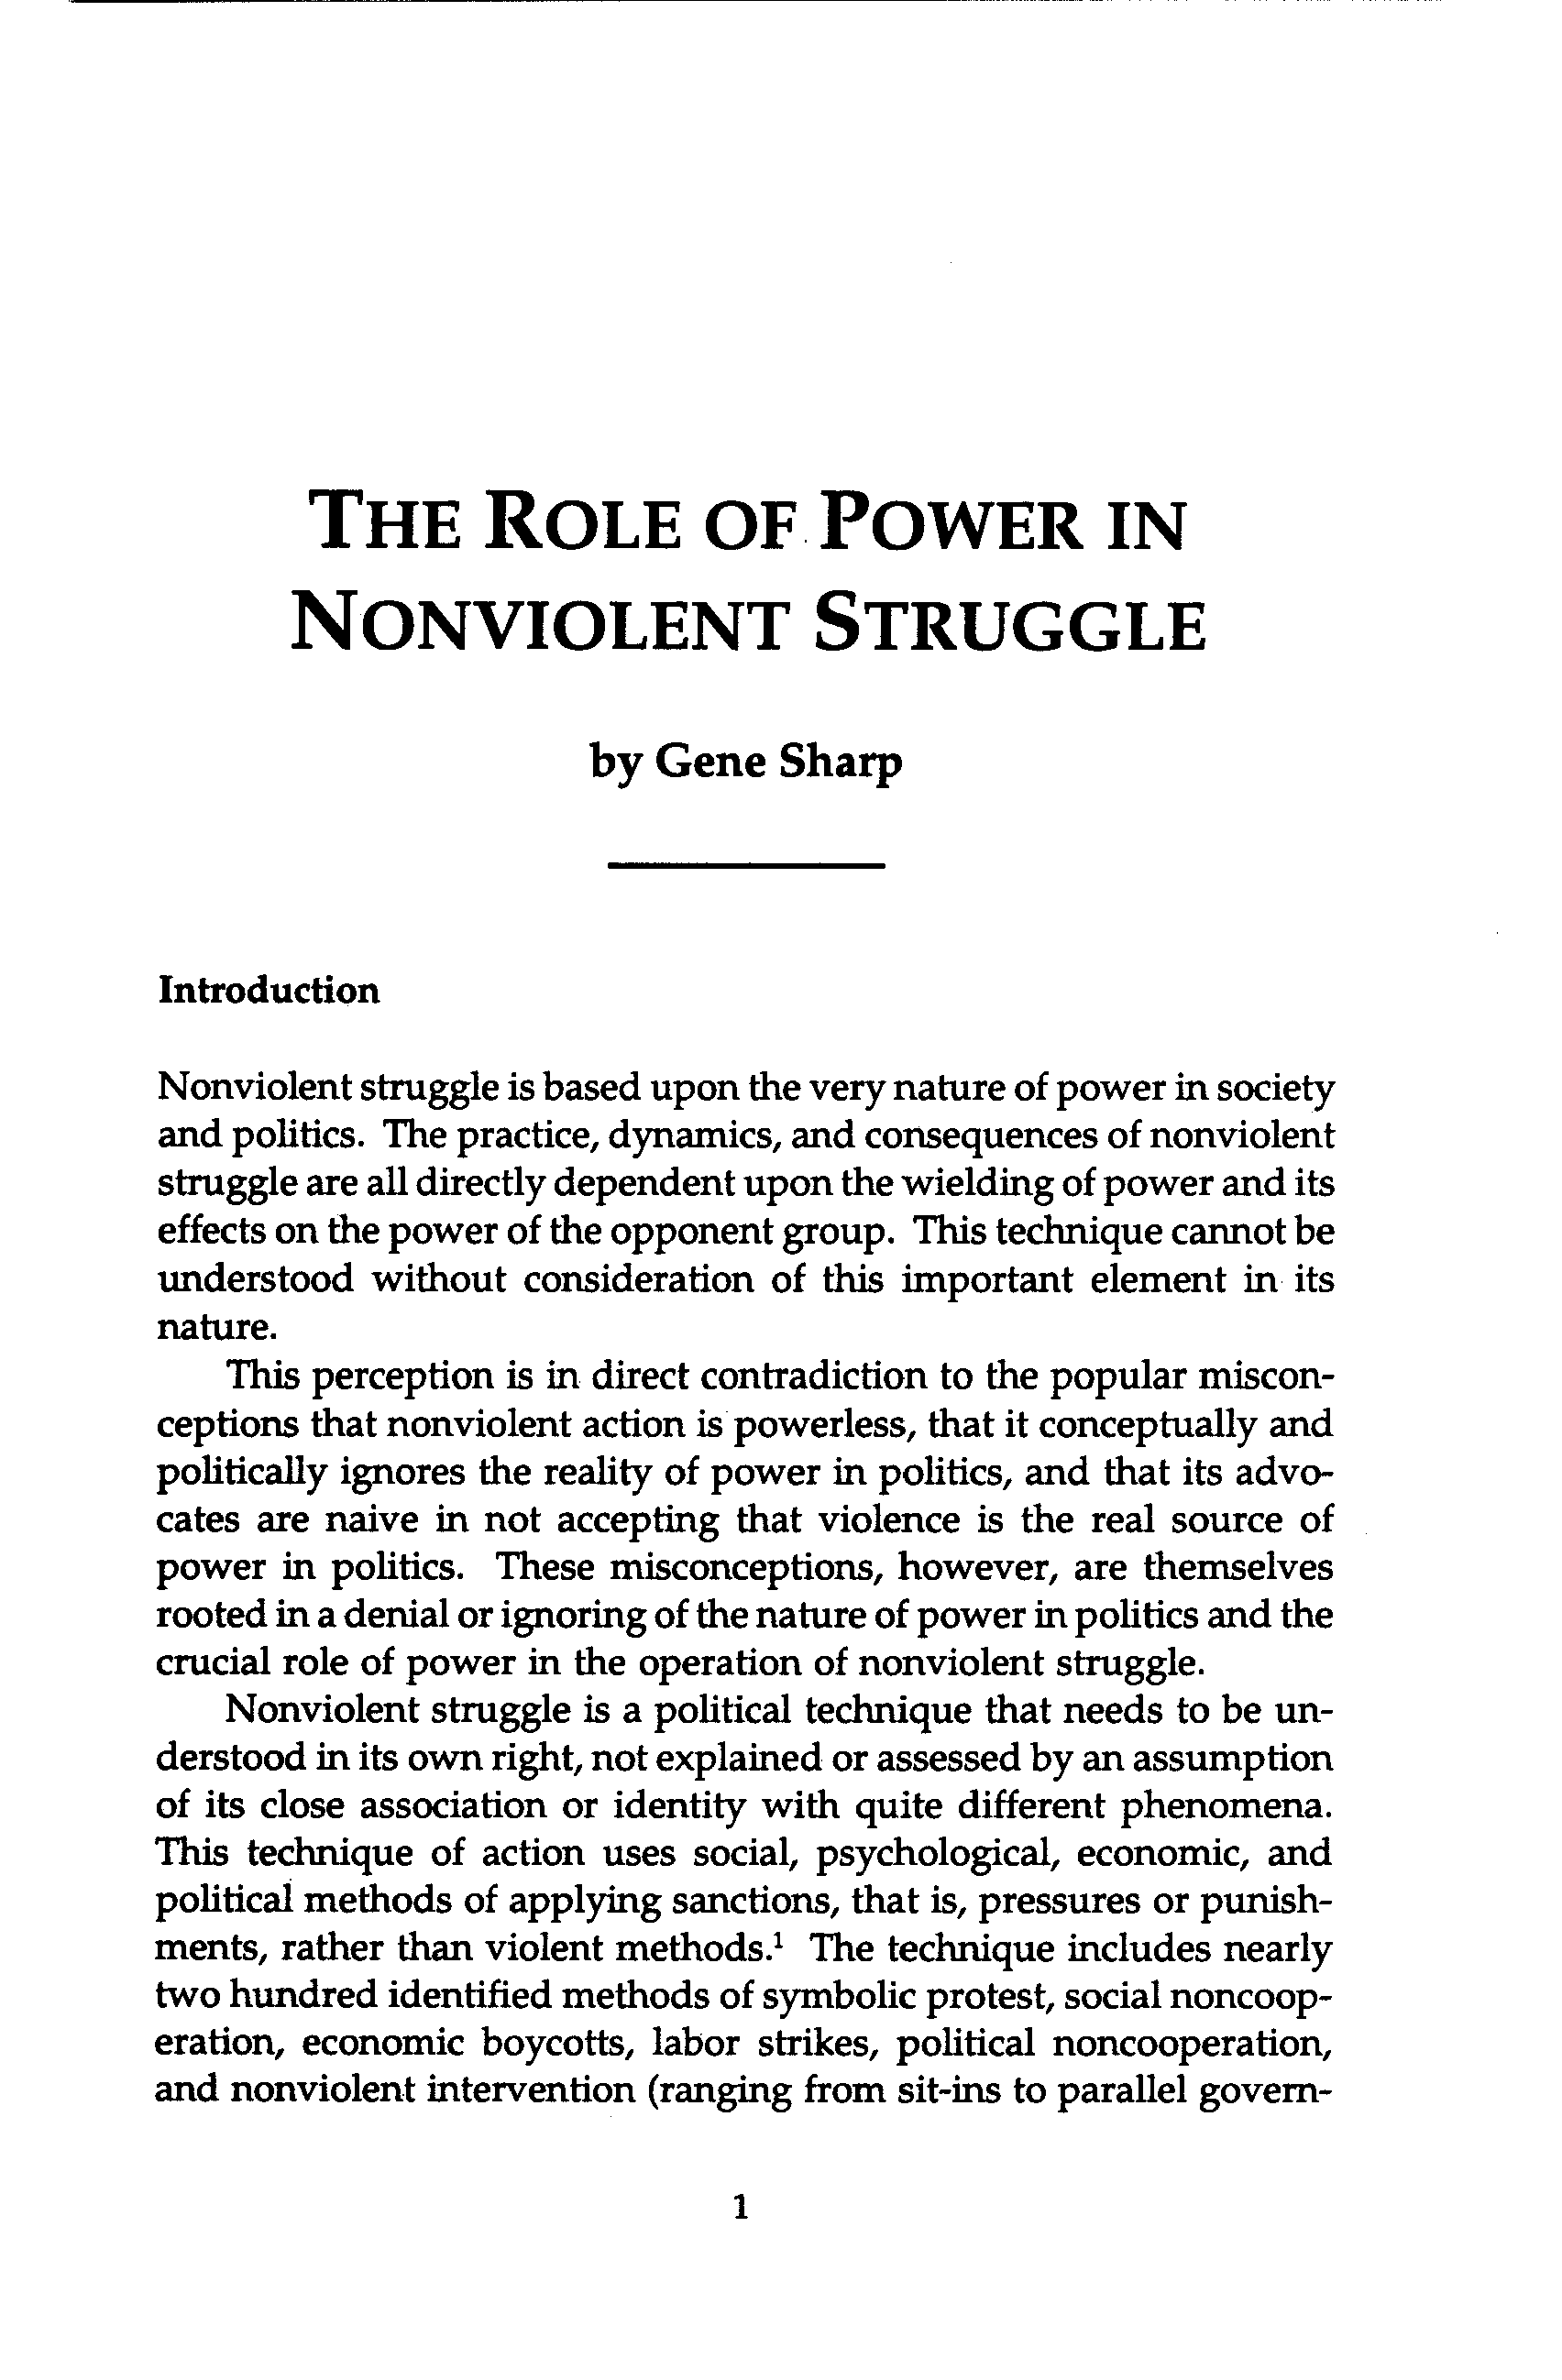 The Role of Power in Nonviolent Struggle